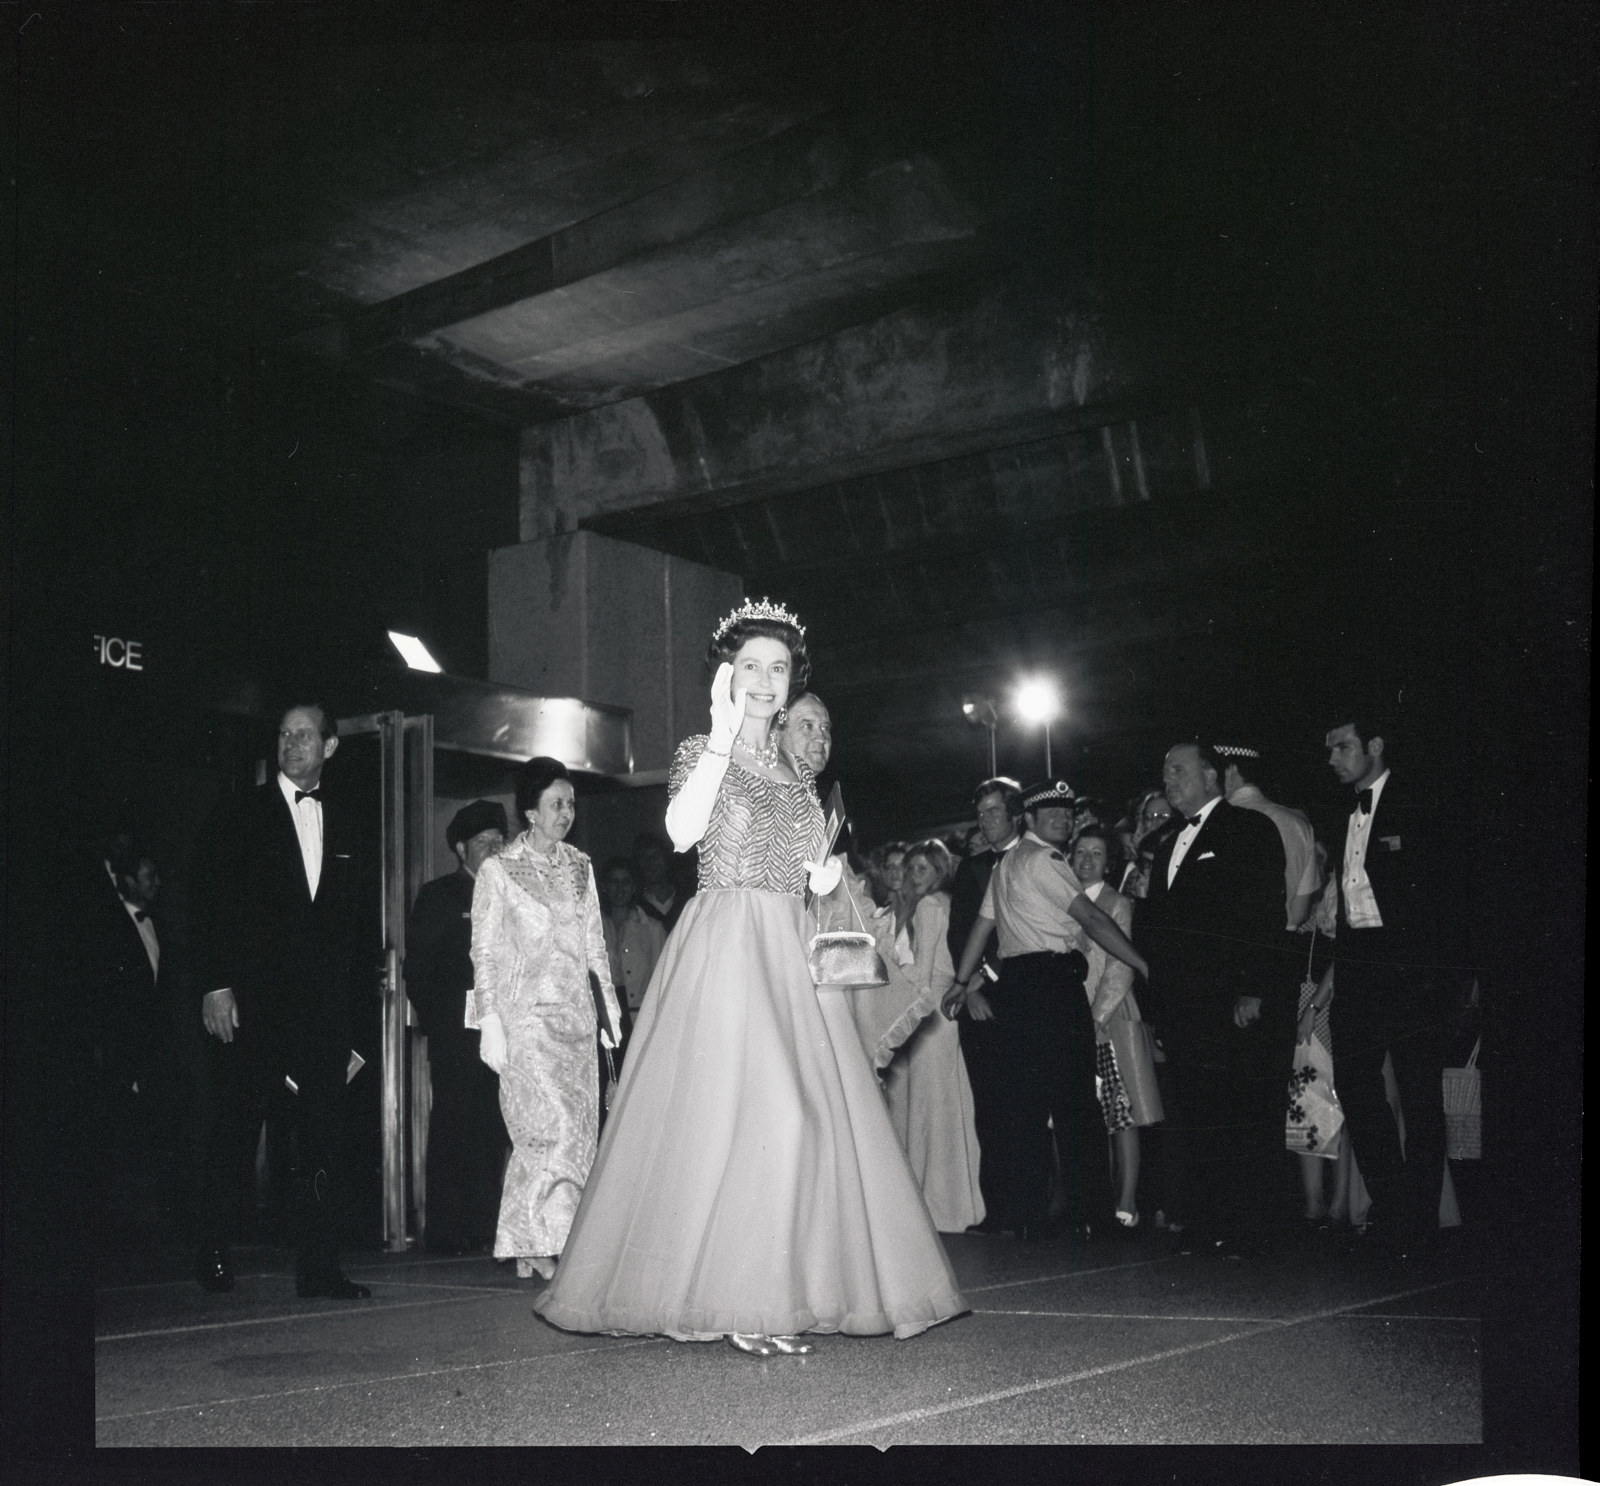 The Queen and official party departing the Opera House after the performance of The Magic Flute by the Australian Opera, Monday 22nd October 1973 [L – R Sir Asher Joel, Lady Mollie Askin, HM the Queen carrying a souvenir programme, Premier Robert Askin].